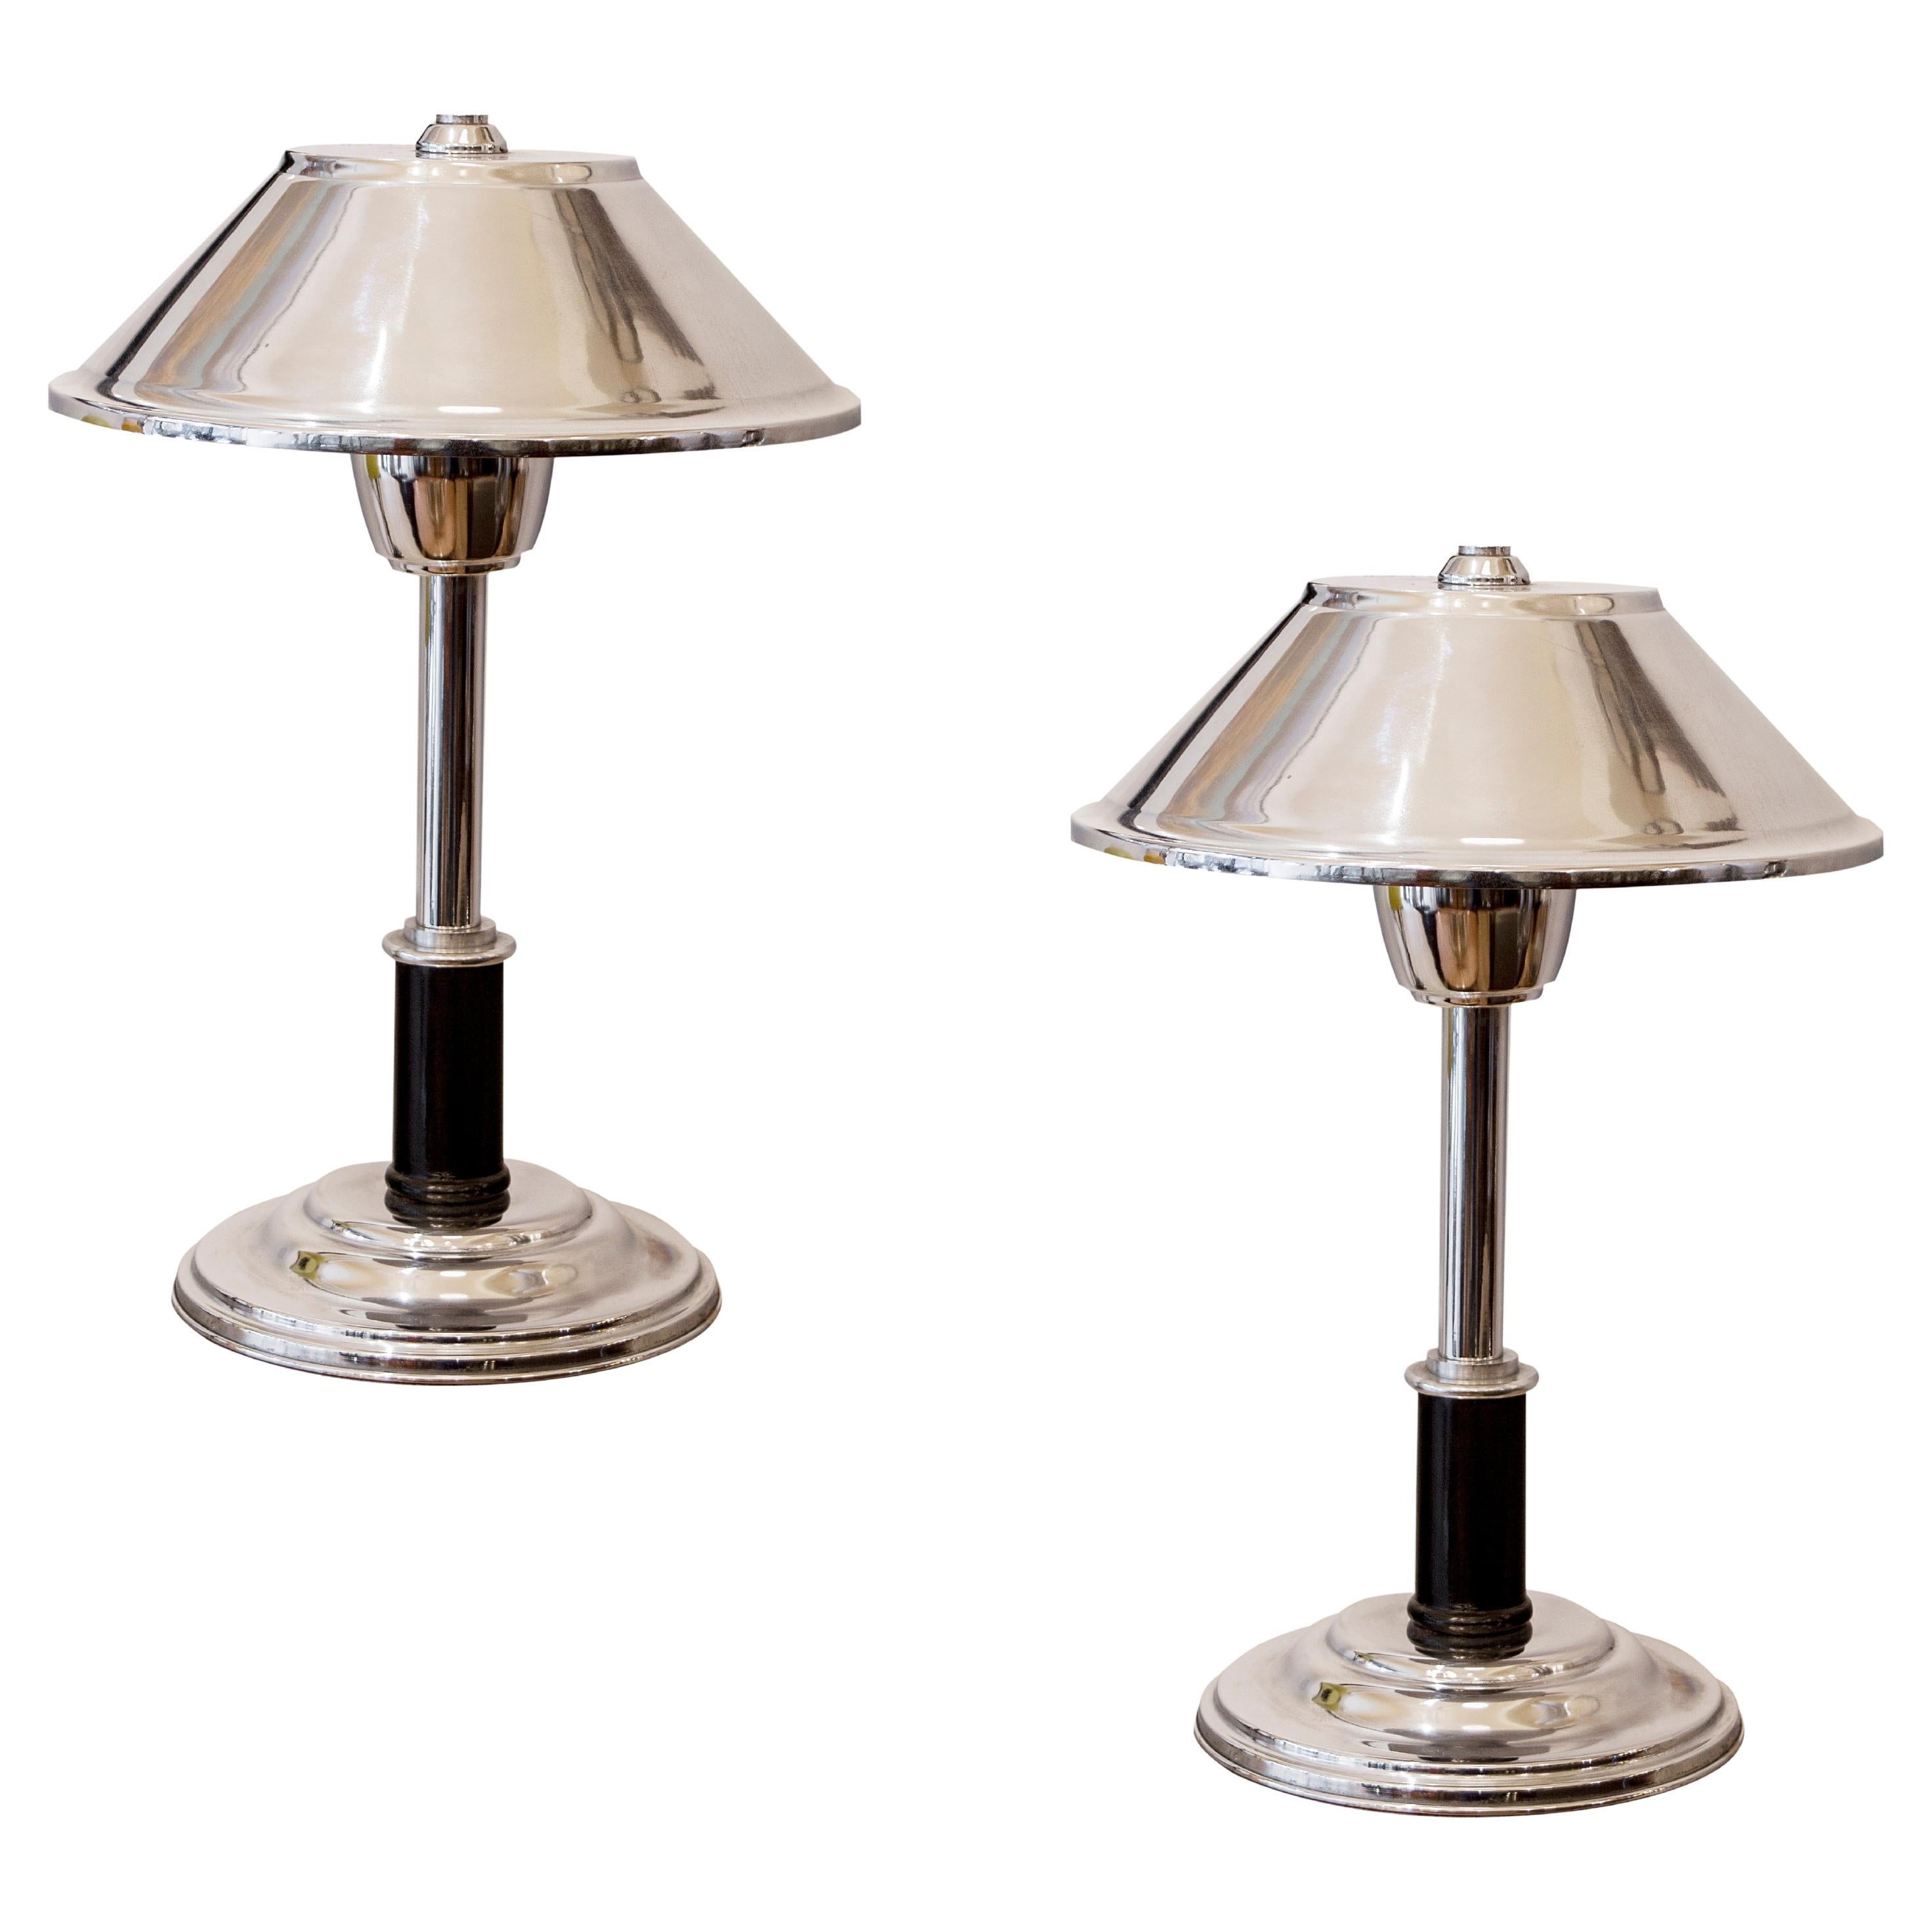 Pair of Art Deco Table Lamp in wood and chrome, 1930